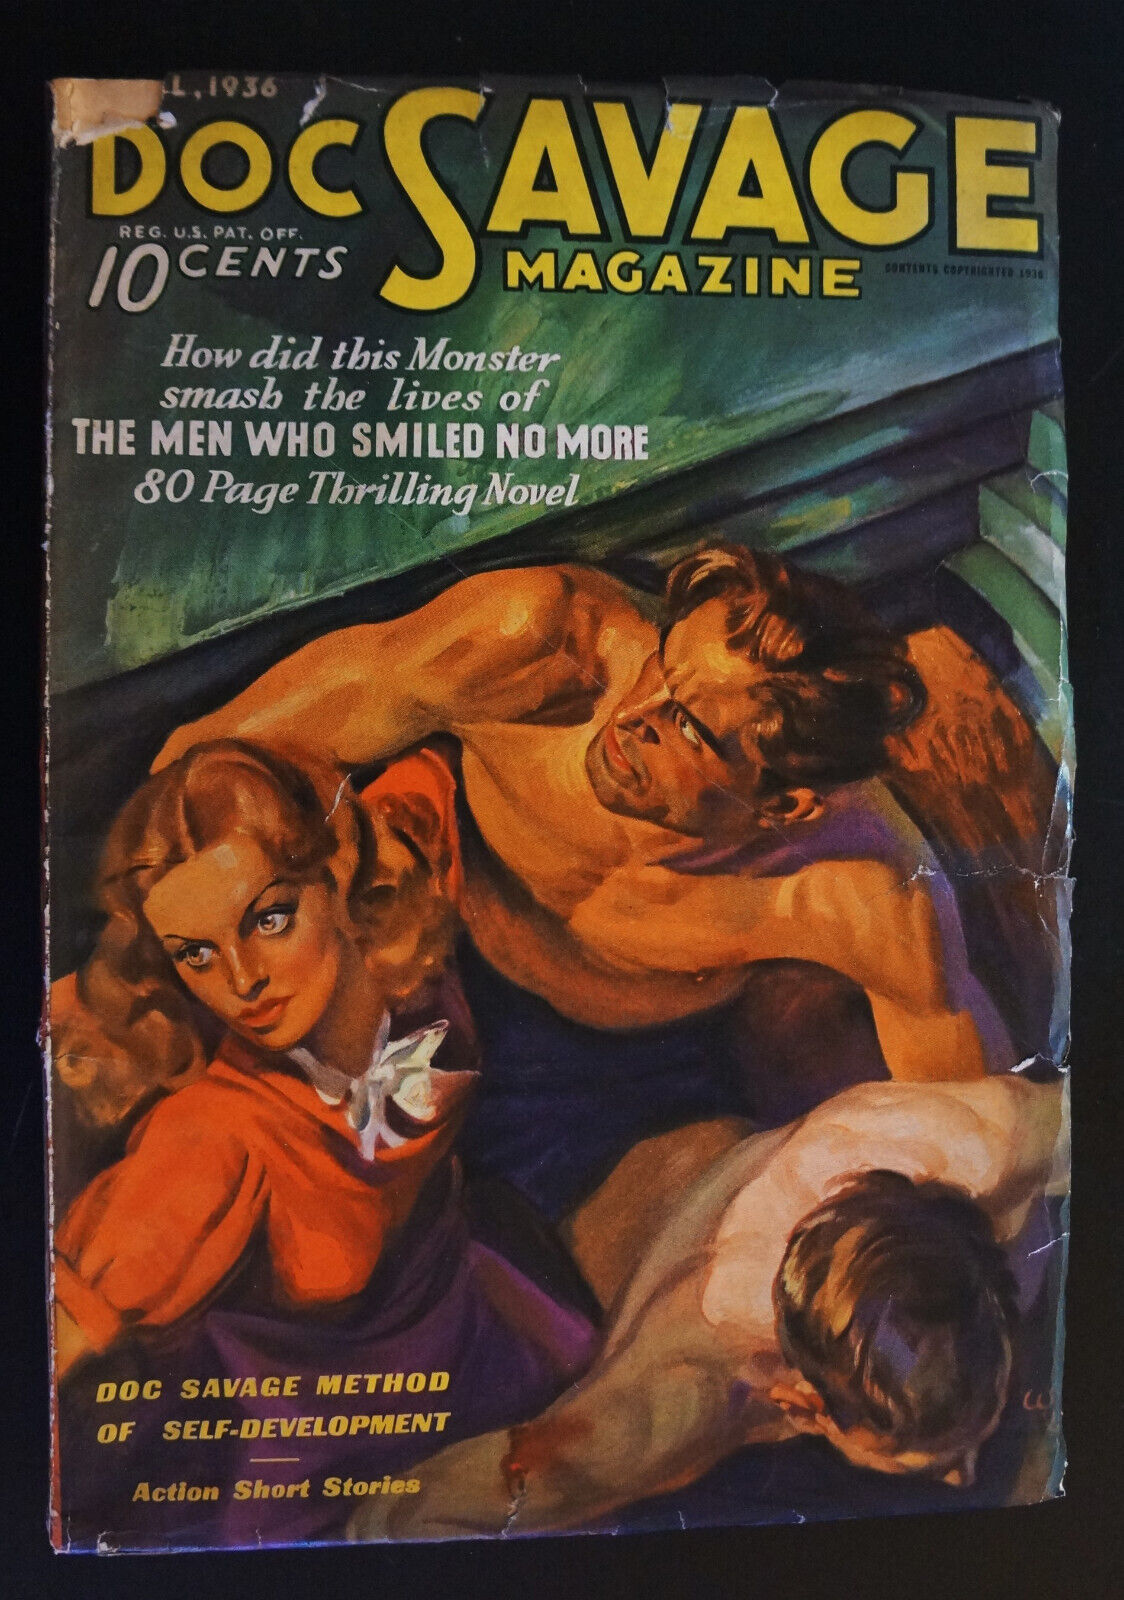 Doc Savage Pulp Magazine April 1936 The Men Who Smiled No More